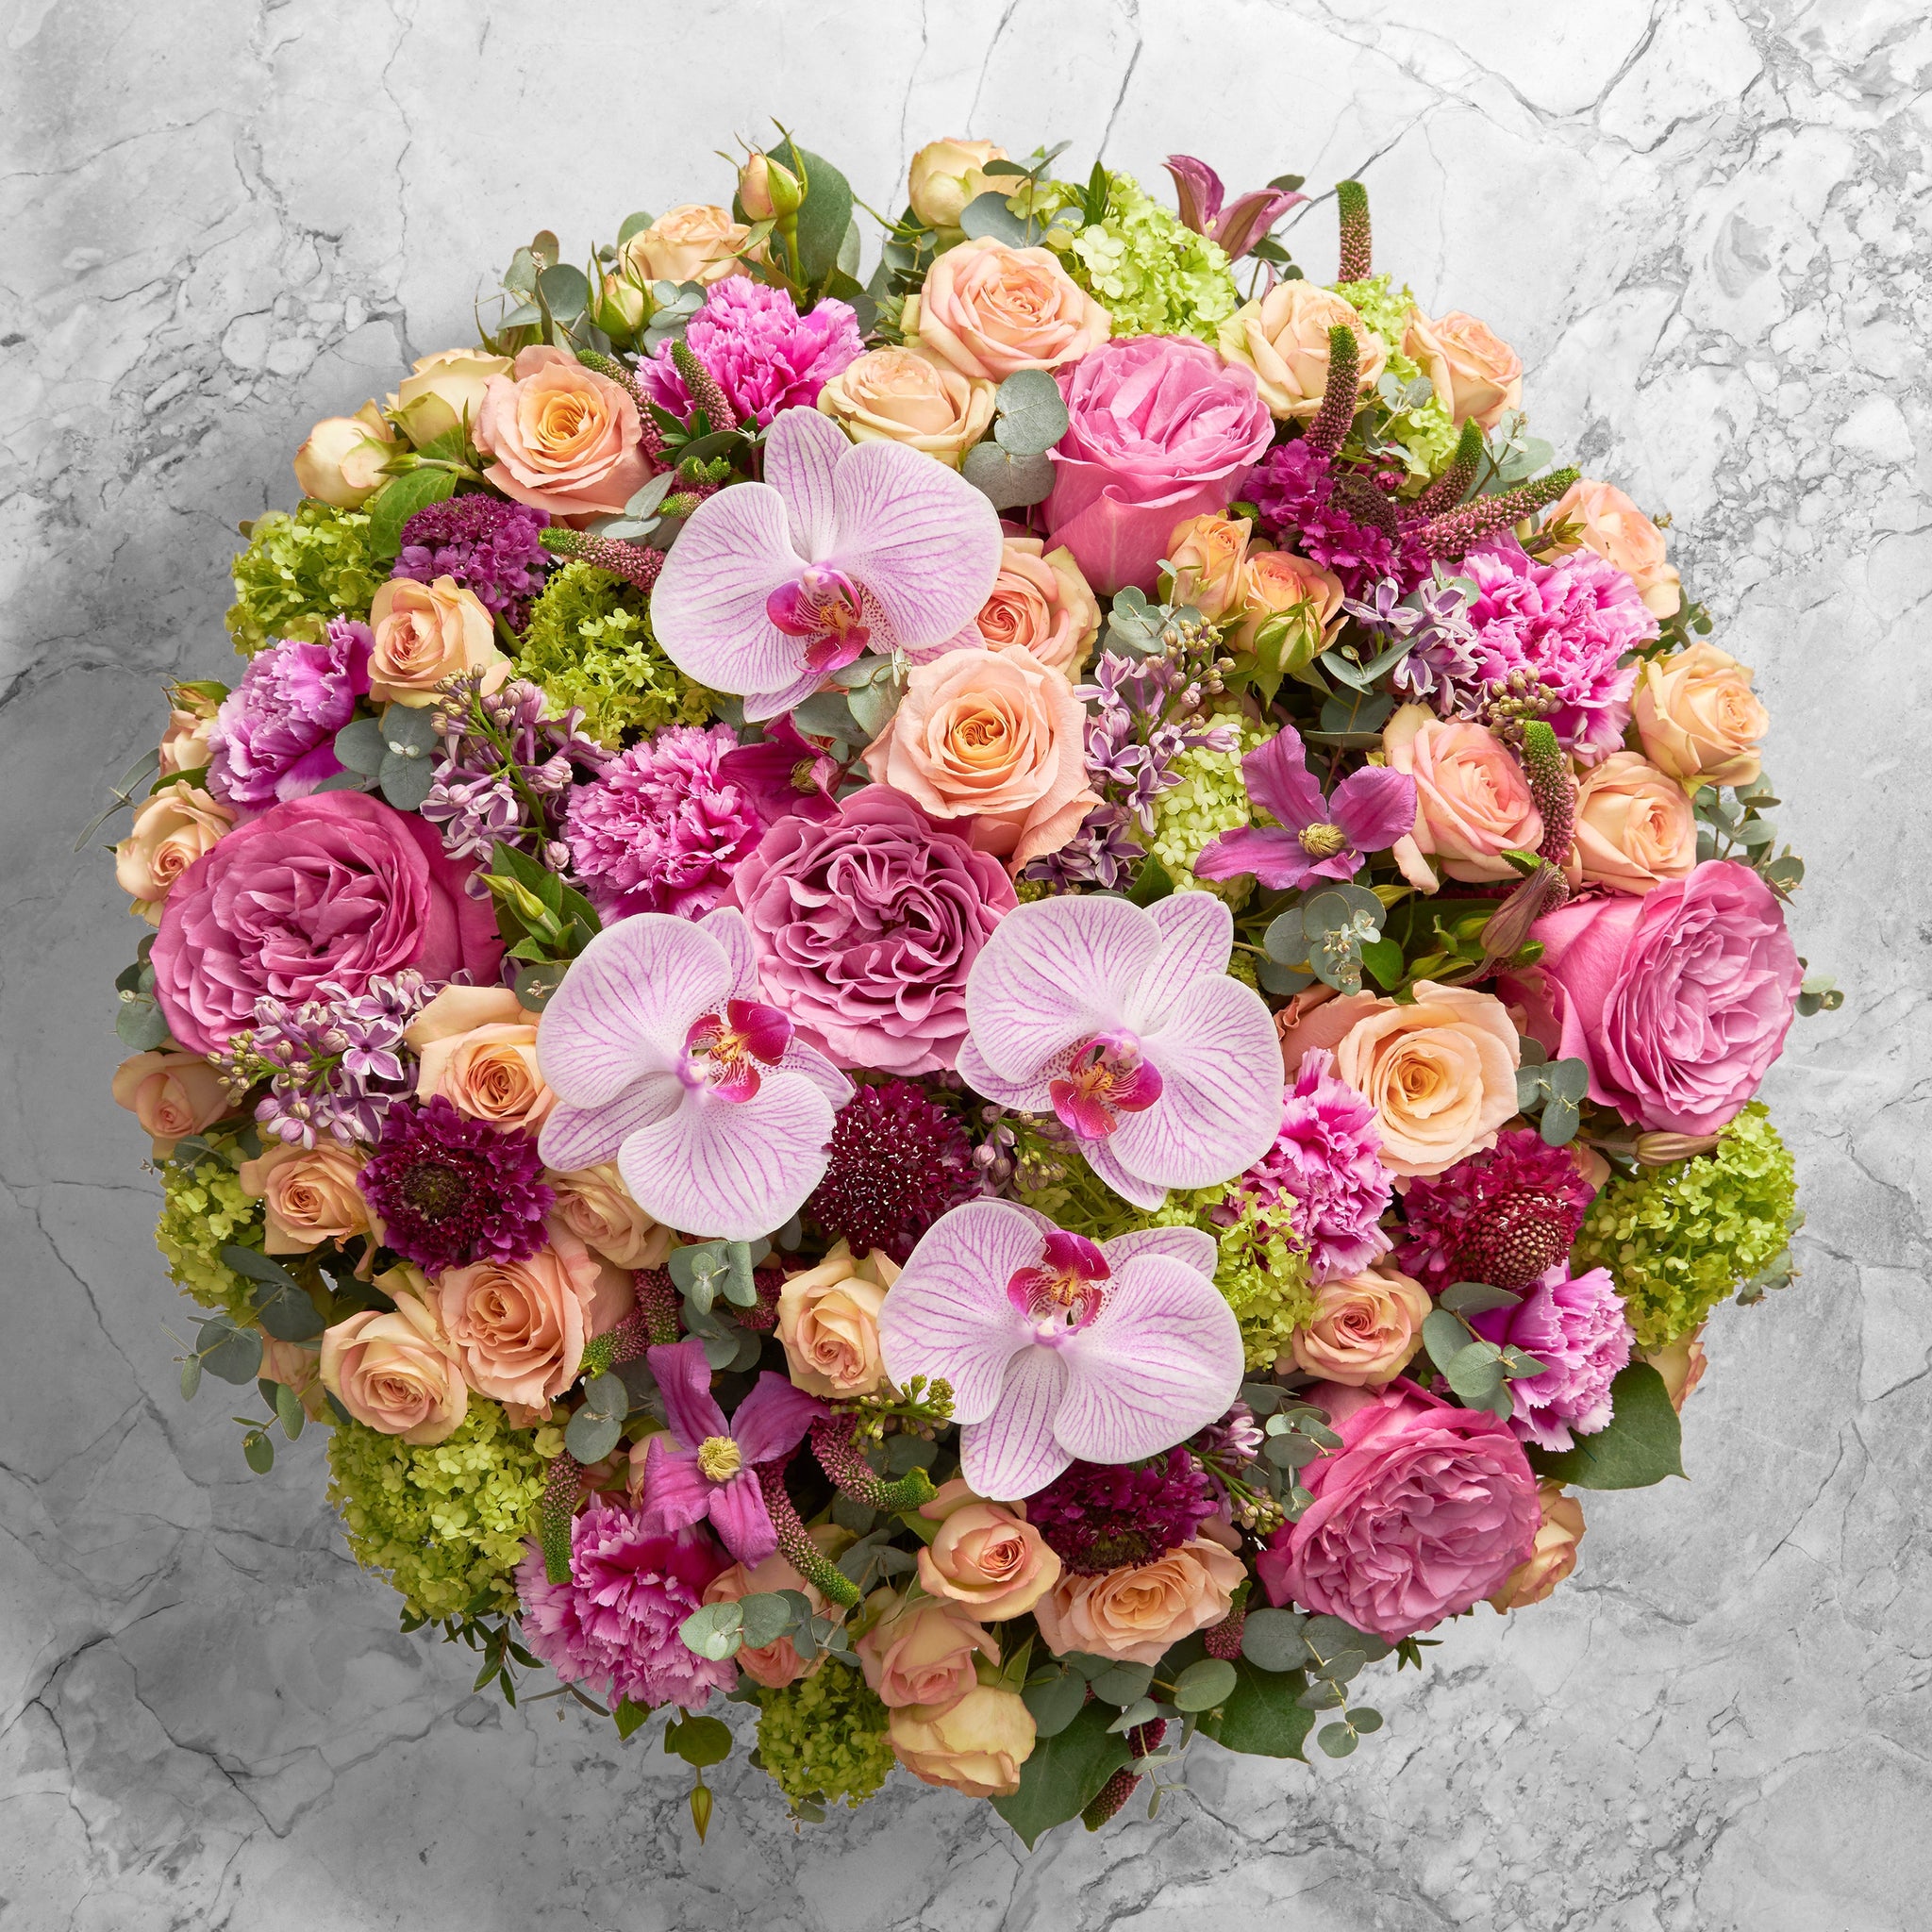 Neill Strain Floral Couture Mother's Day luxury flower gifts London